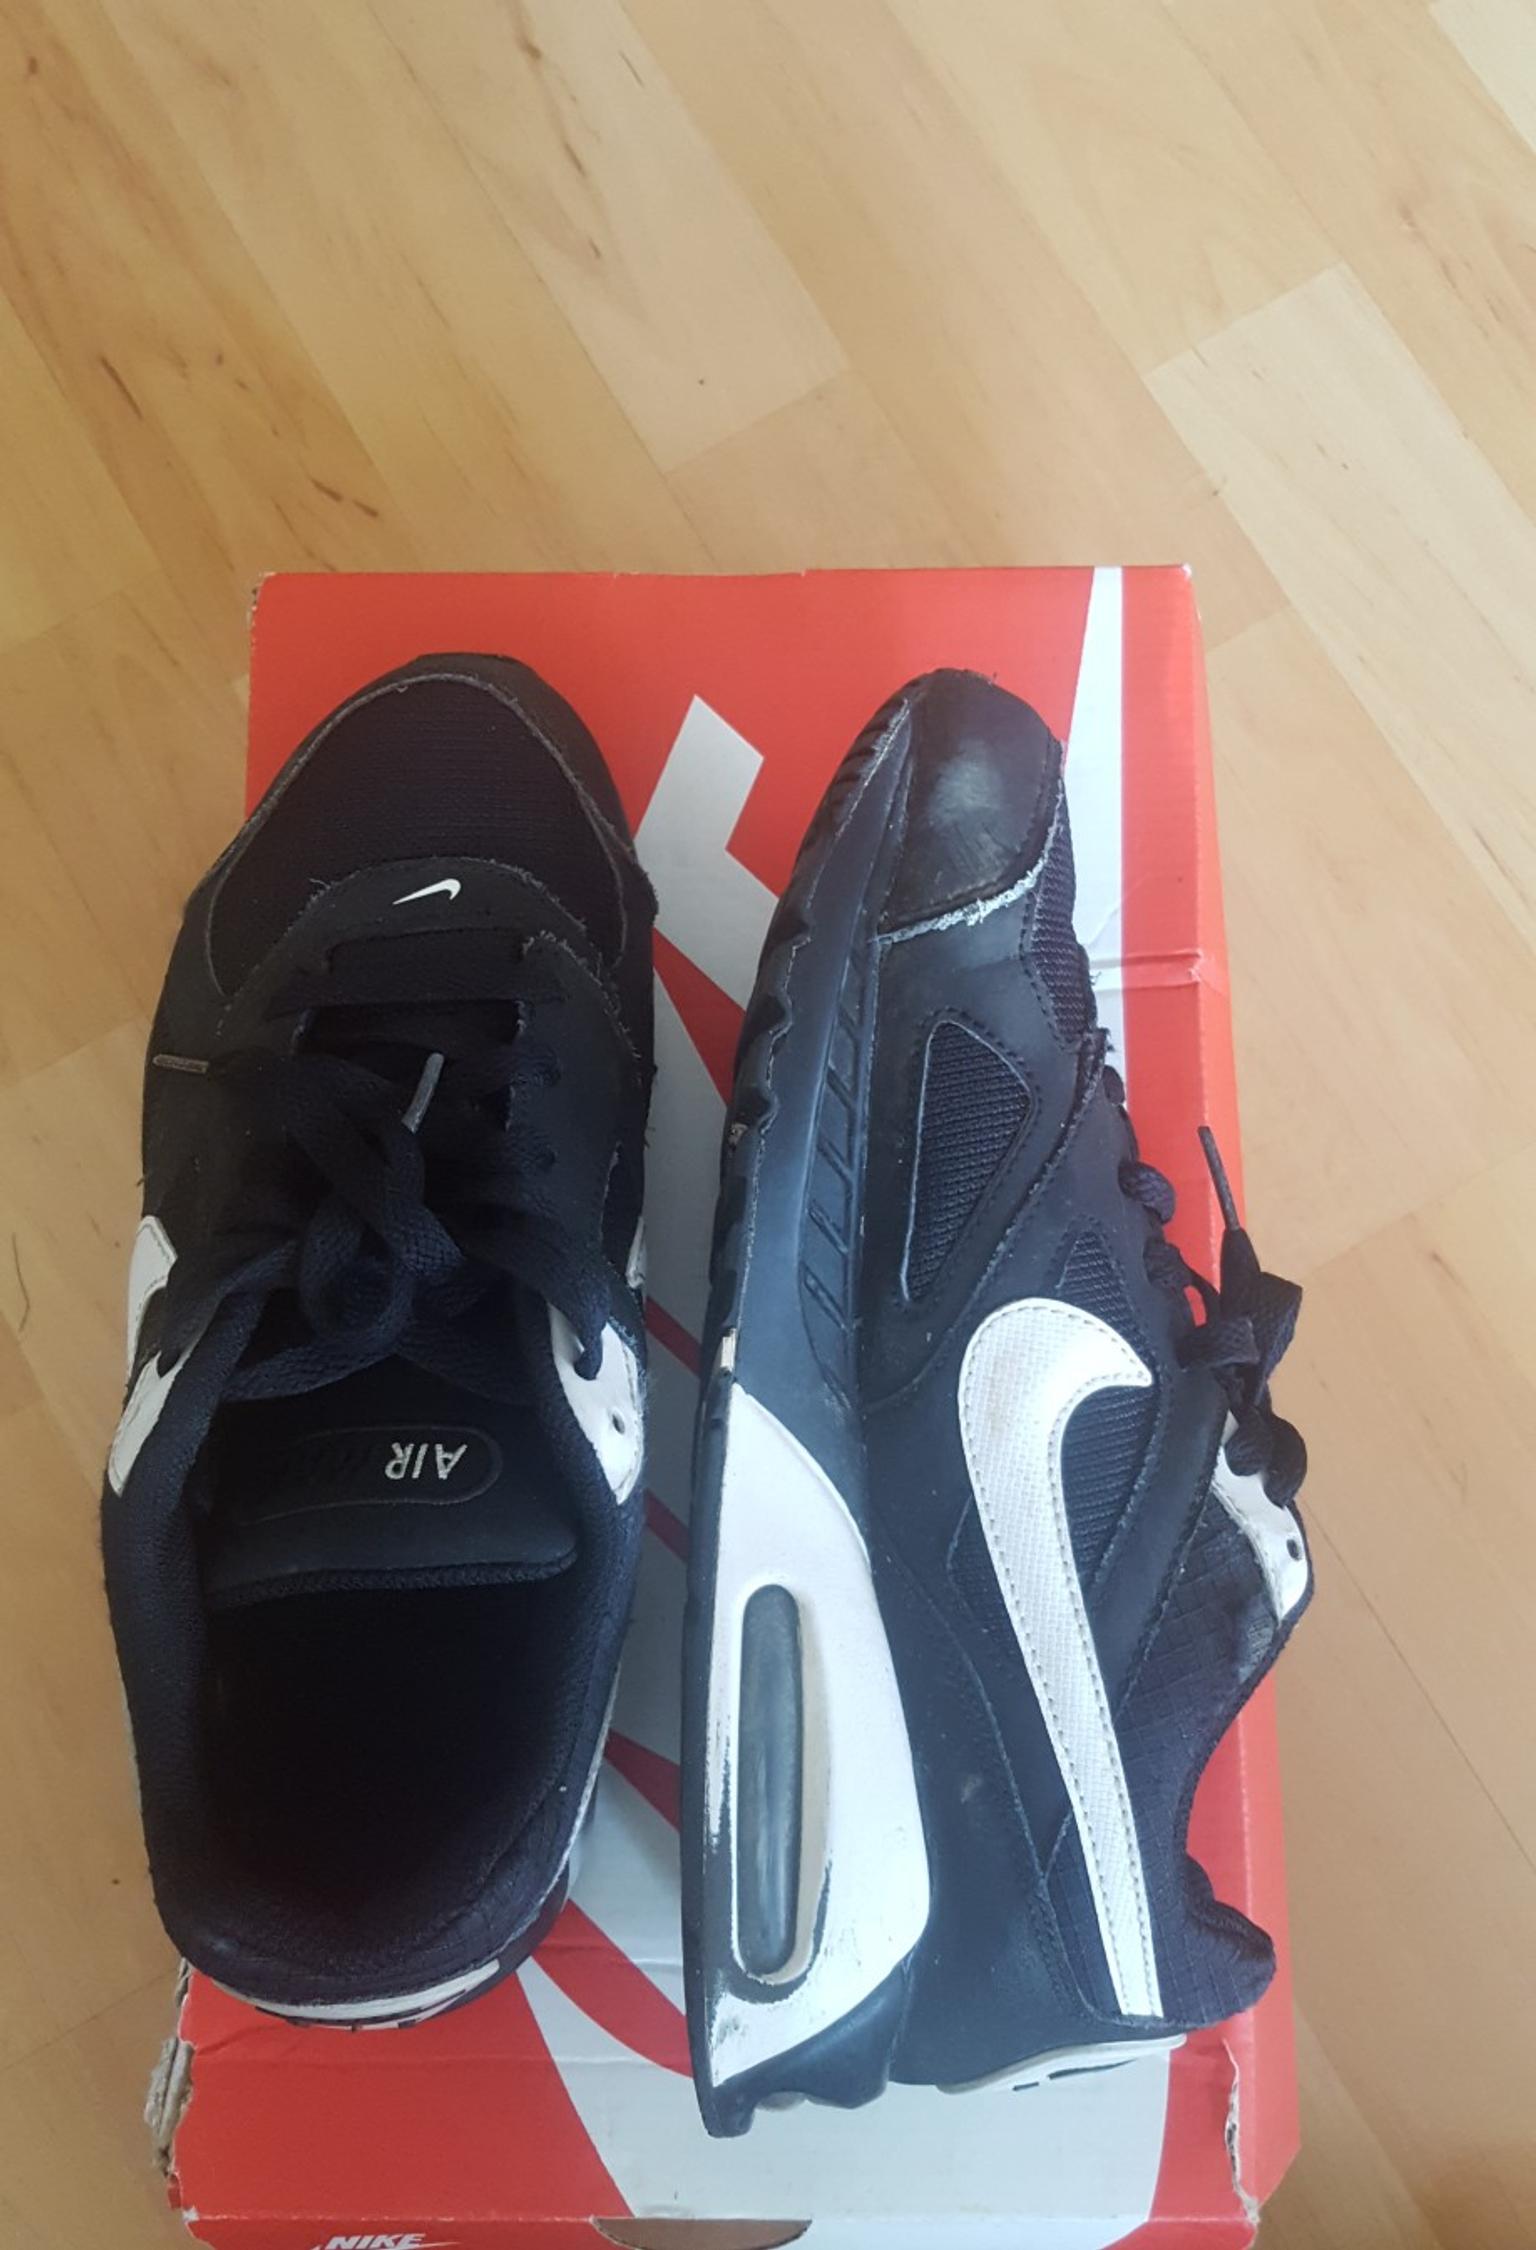 Nike Air Max Ivo black white size 5 in KT19 Ewell for £12.99 for sale |  Shpock